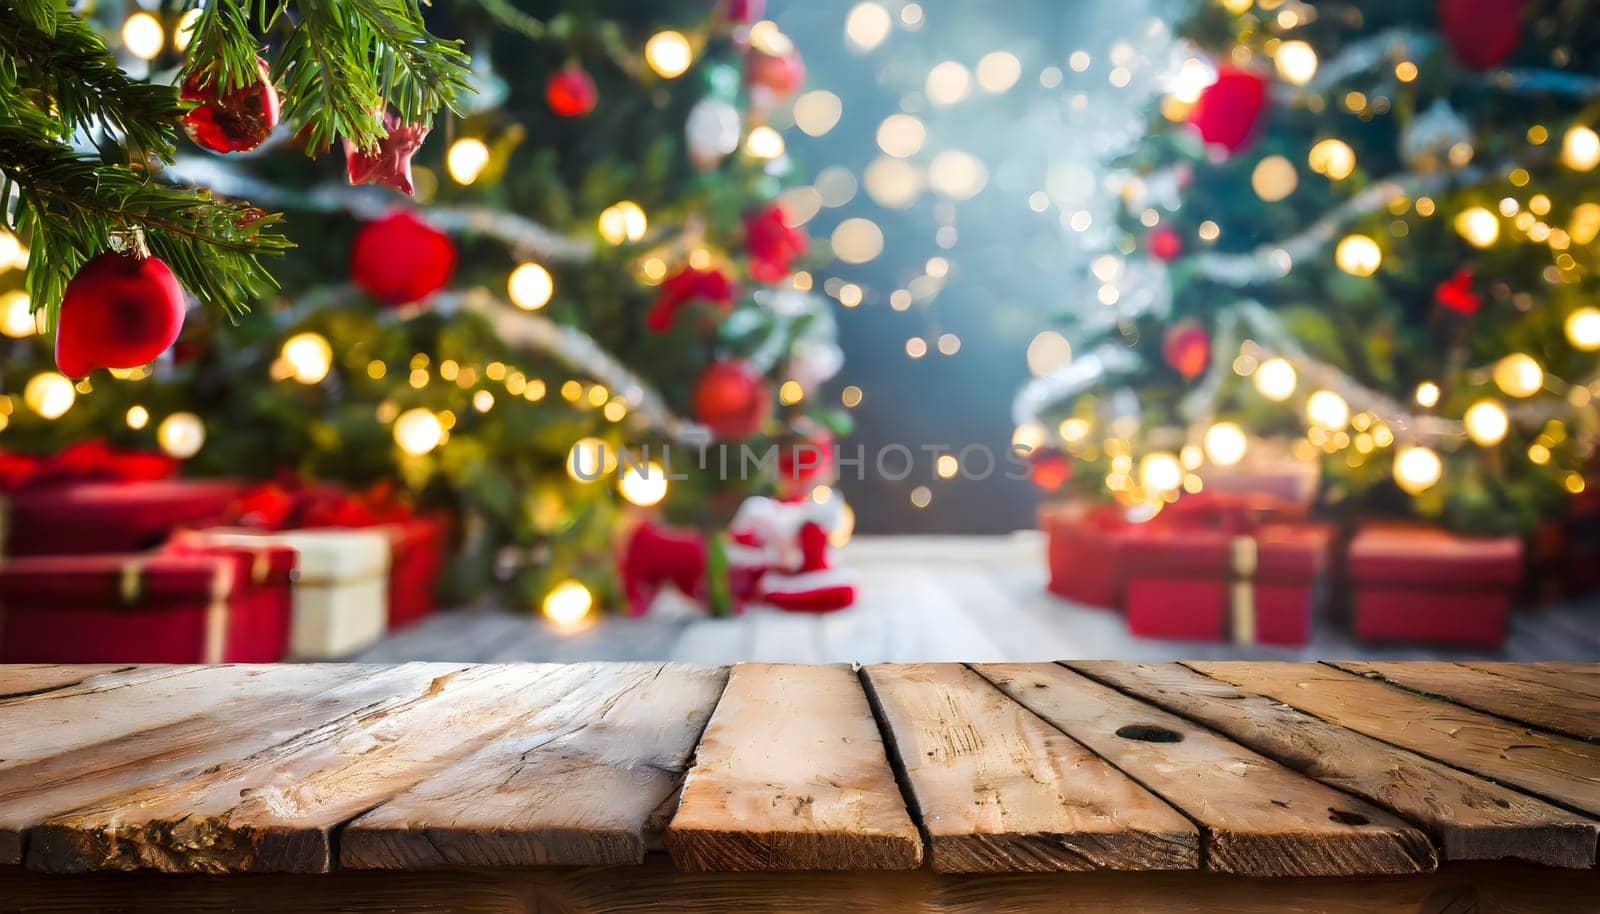 Holidays background with illuminated Christmas tree, gifts and decoration in background and a wooden table with of free space for your decoration. c